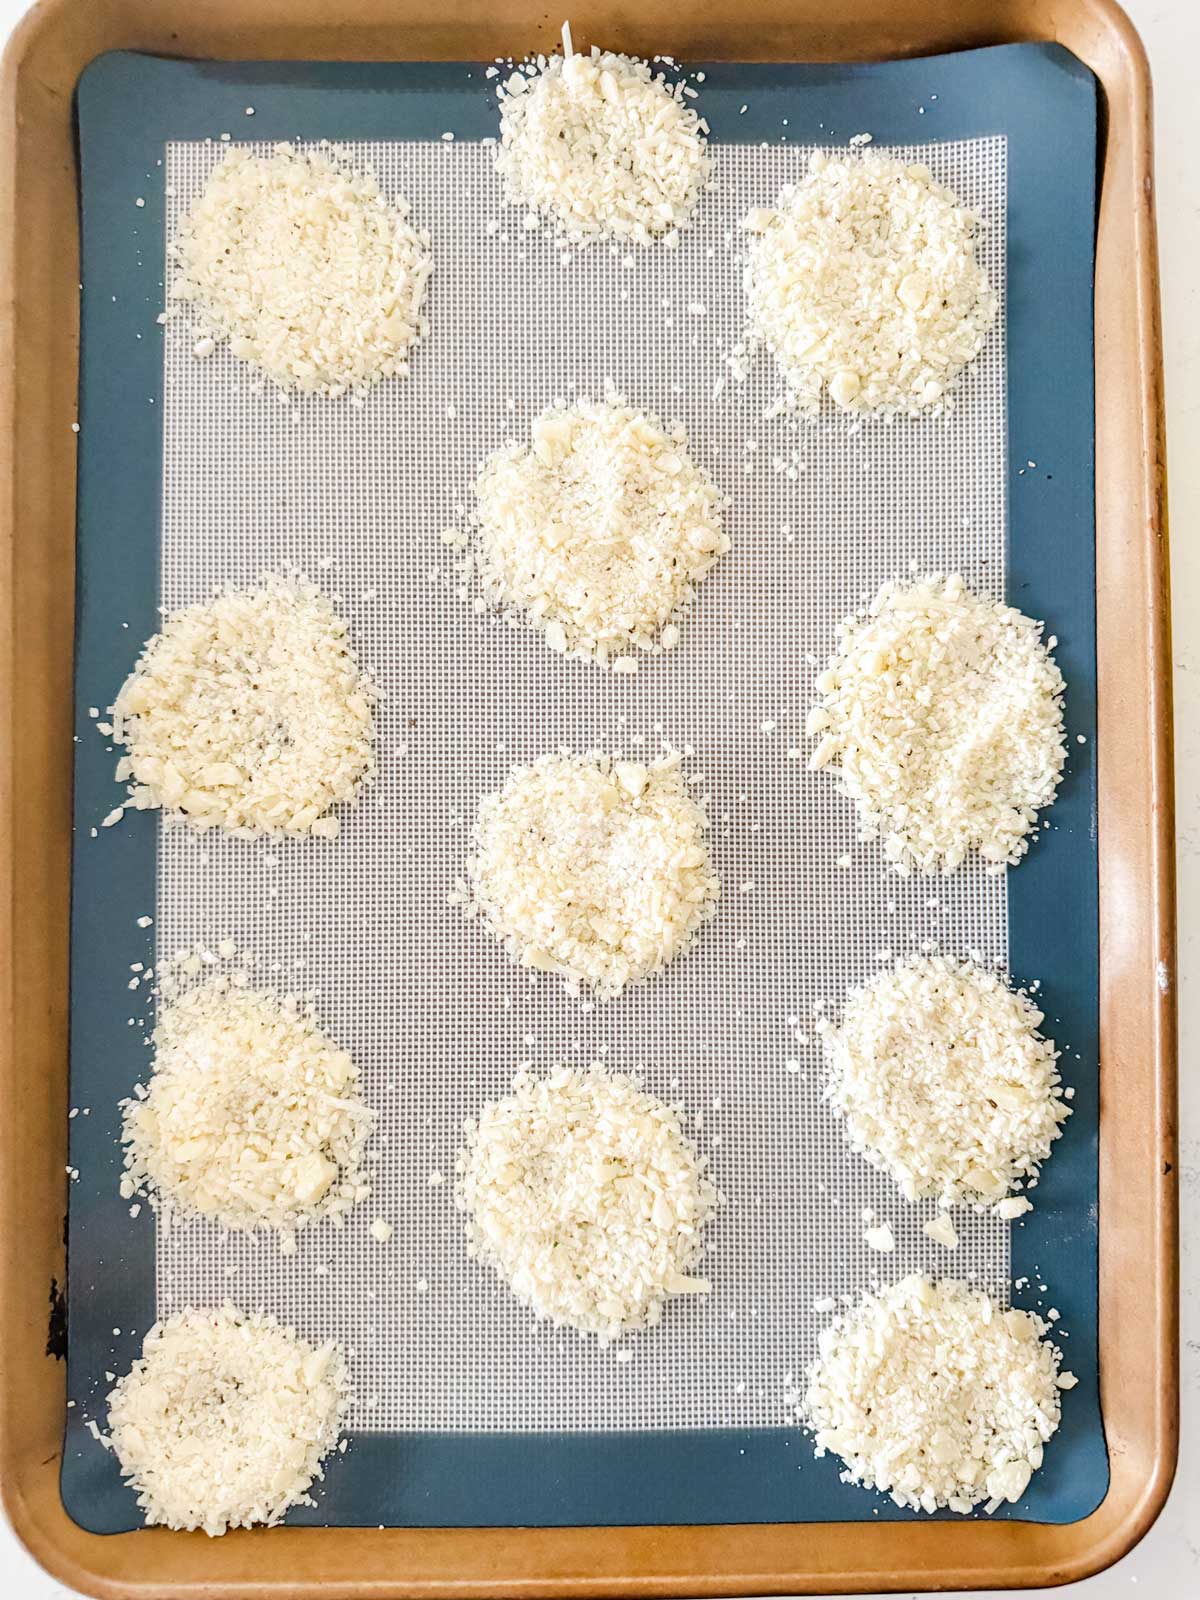 Parmesan crisps ready for the oven.